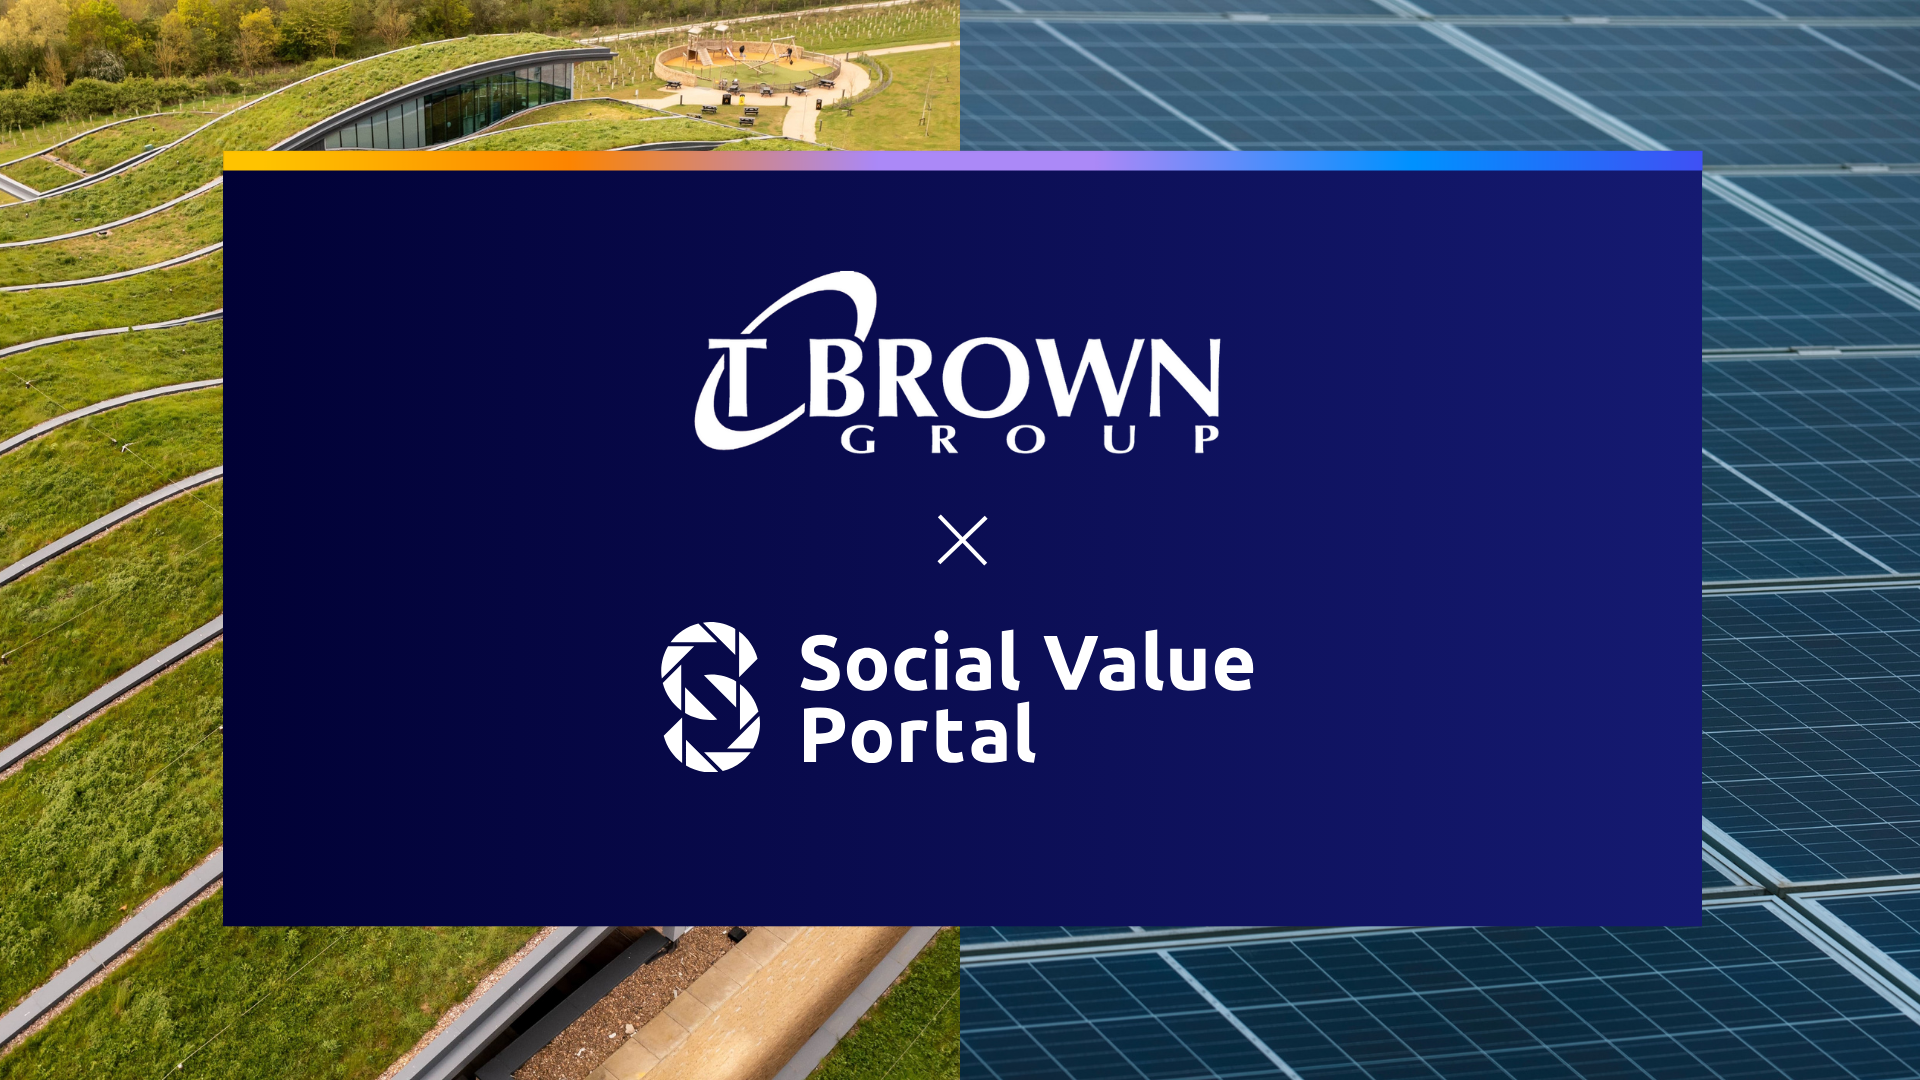 T Brown Group (TBG) and Social Value Portal